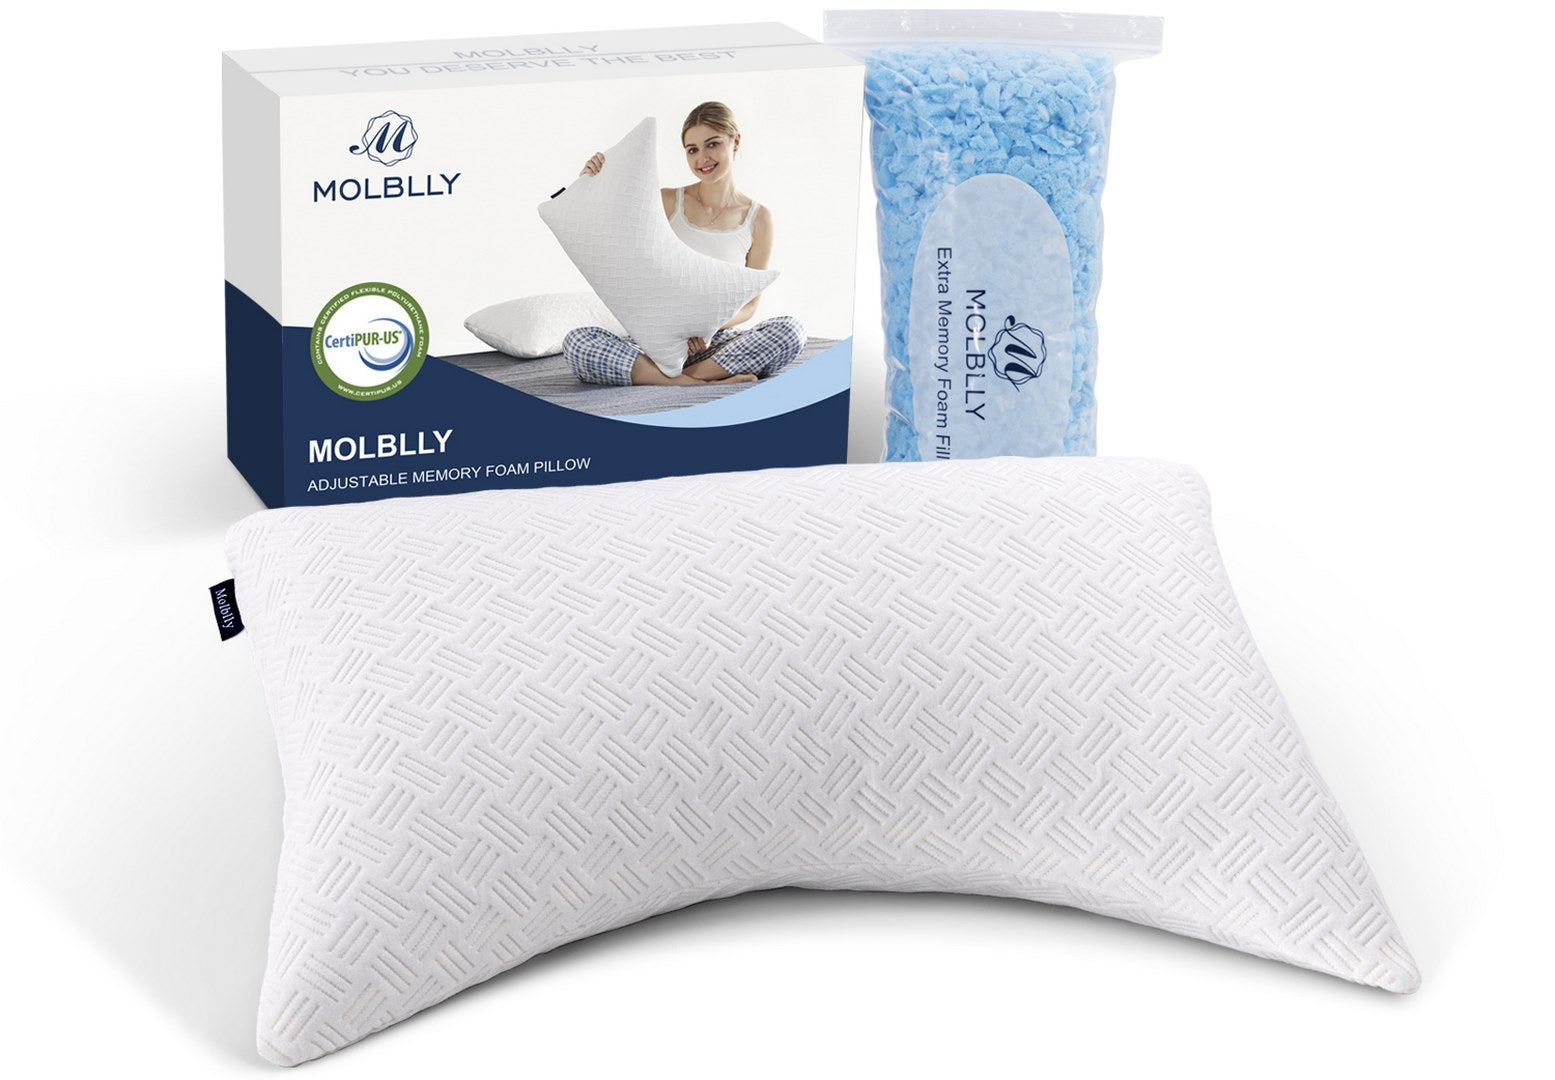 Xtreme Comforts Shredded Memory Foam Pillow Reviews